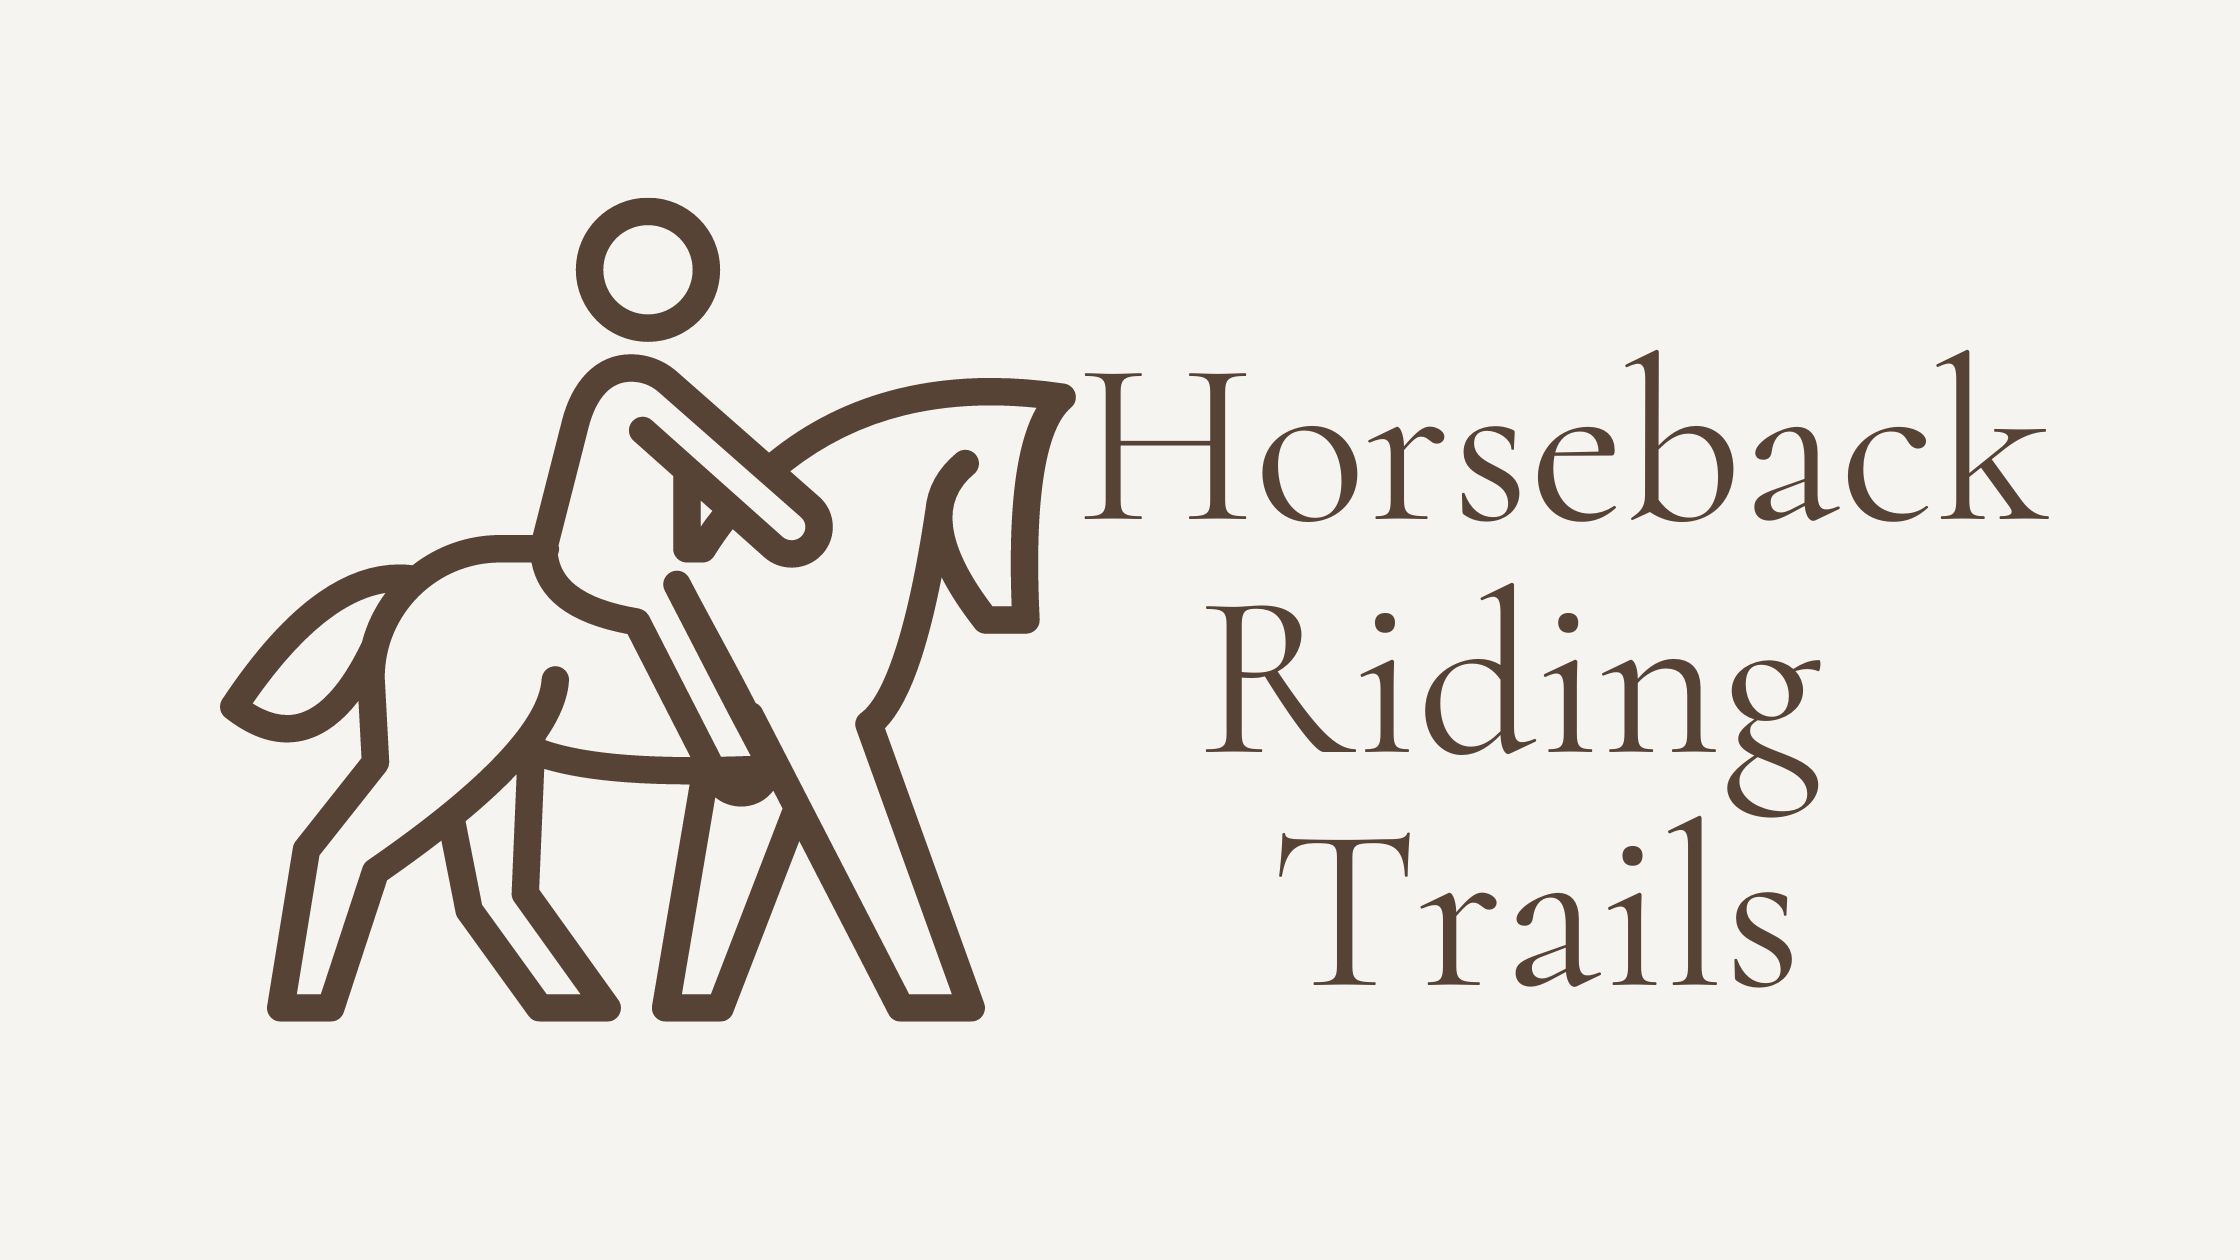 Horseback riding trails cover image chattanooga